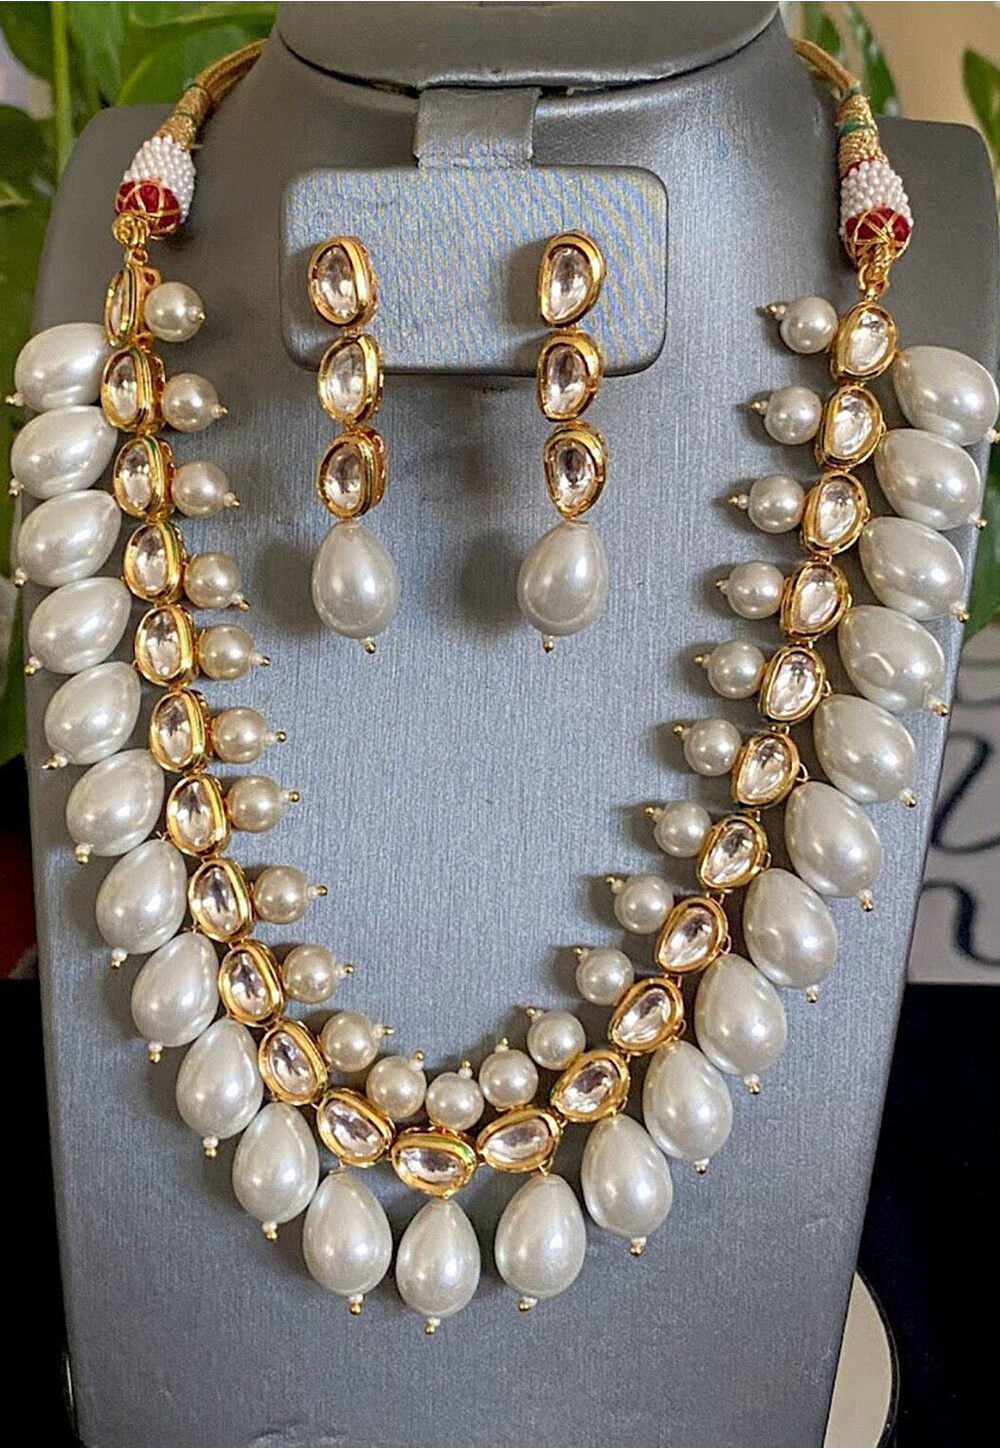 Jaali work Pearls Necklace – 𝗔𝘀𝗽 𝗙𝗮𝘀𝗵𝗶𝗼𝗻 𝗝𝗲𝘄𝗲𝗹𝗹𝗲𝗿𝘆